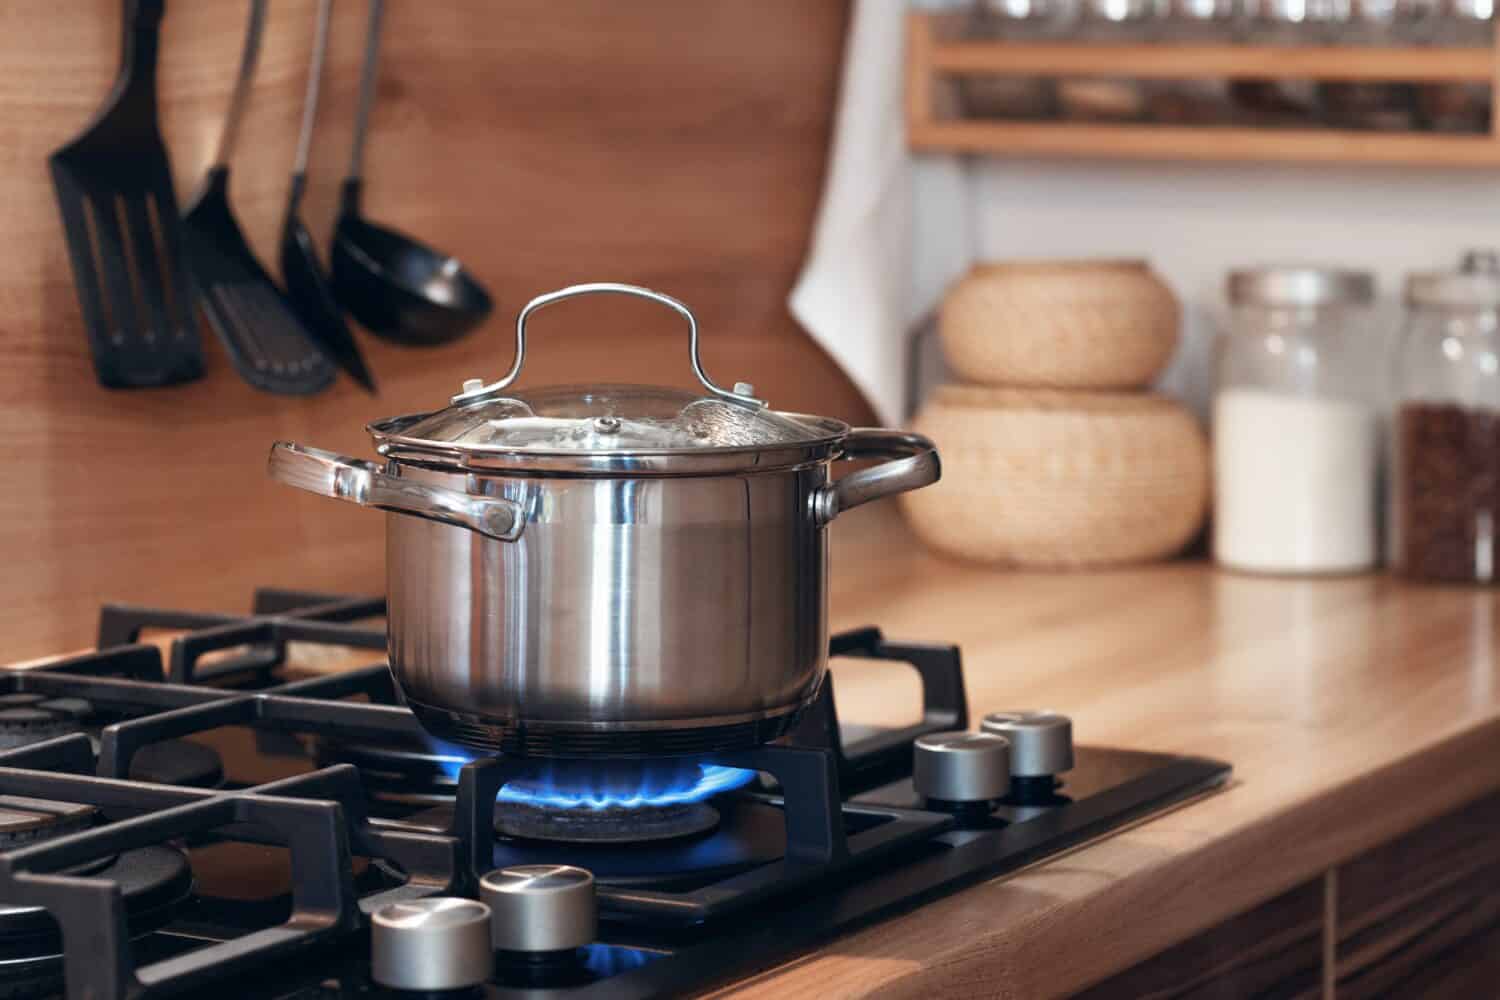 Saucepan vs Pot: What Are The Main Differences? - The Cookware Geek